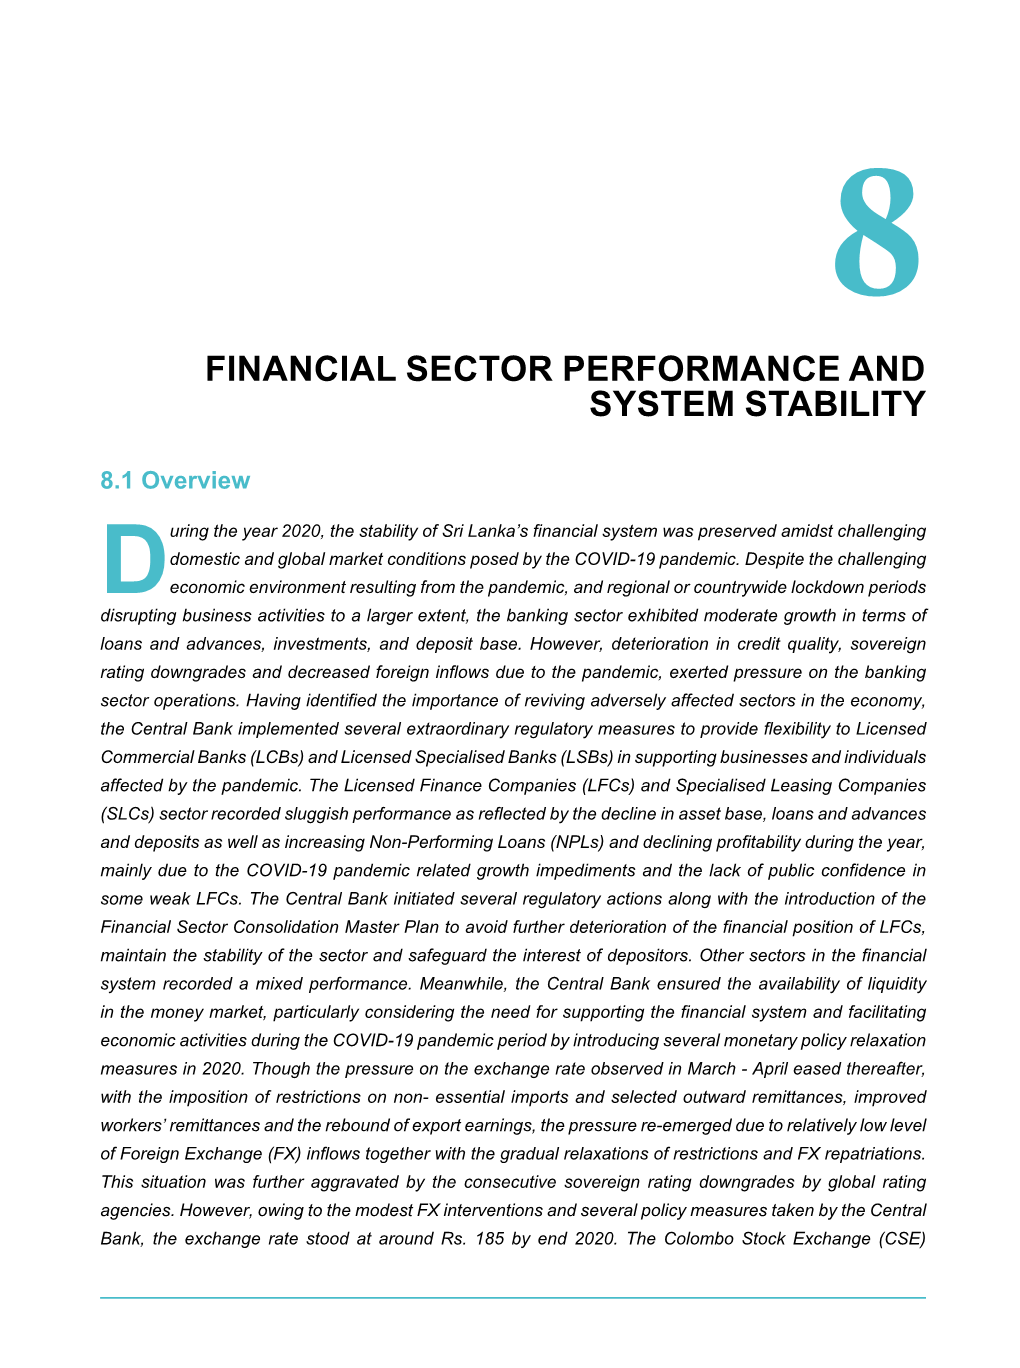 Financial Sector Performance and System Stability